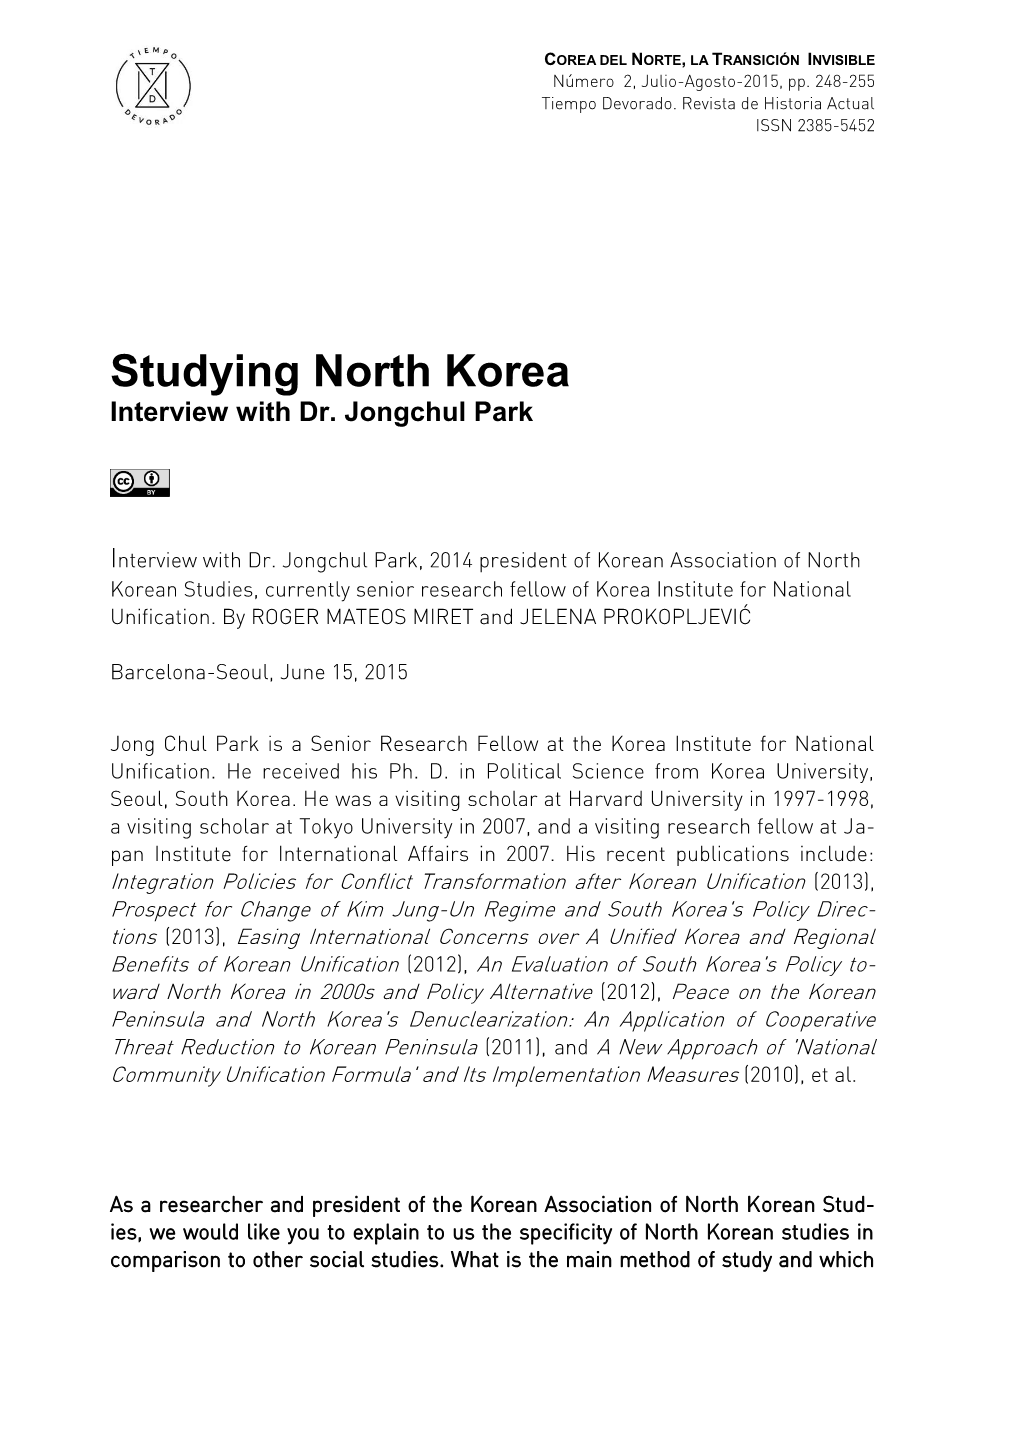 Studying North Korea Interview with Dr